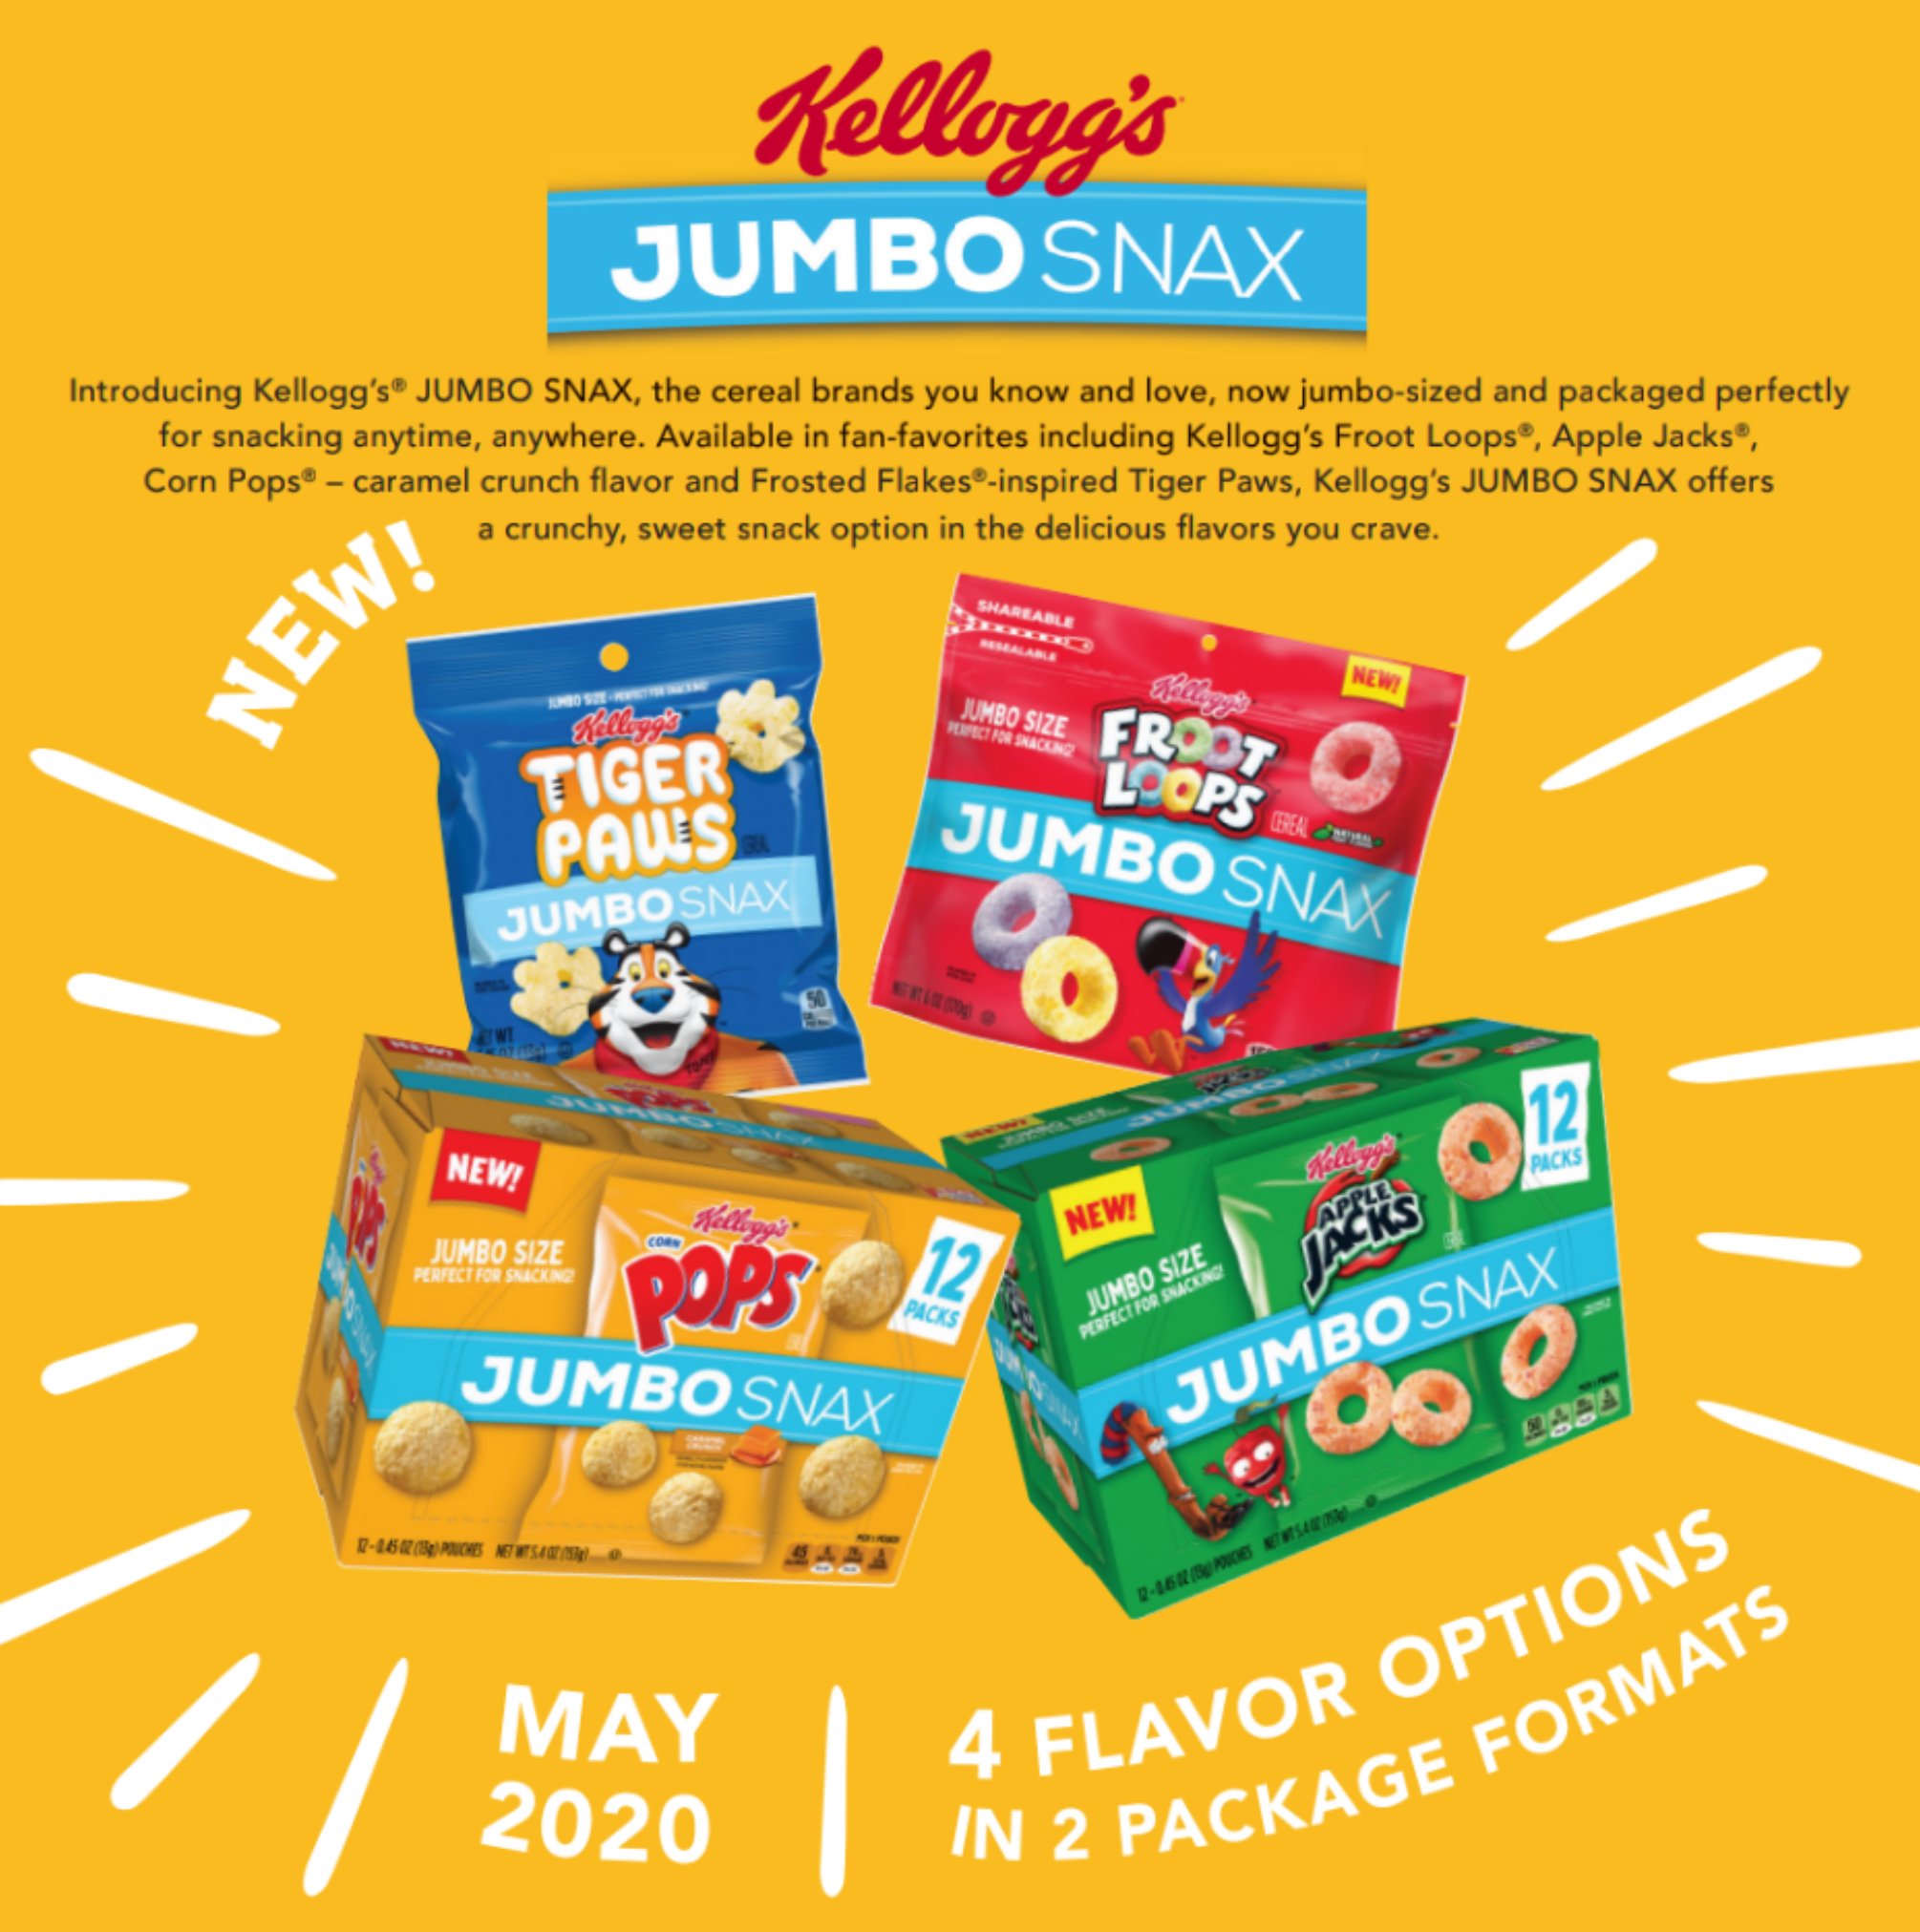 Kellogg's New Jumbo Snax: Apple Jacks, Froot Loops, Caramel Corn Pops, and Frosted Flakes Tiger Paws Cereals Snacks 